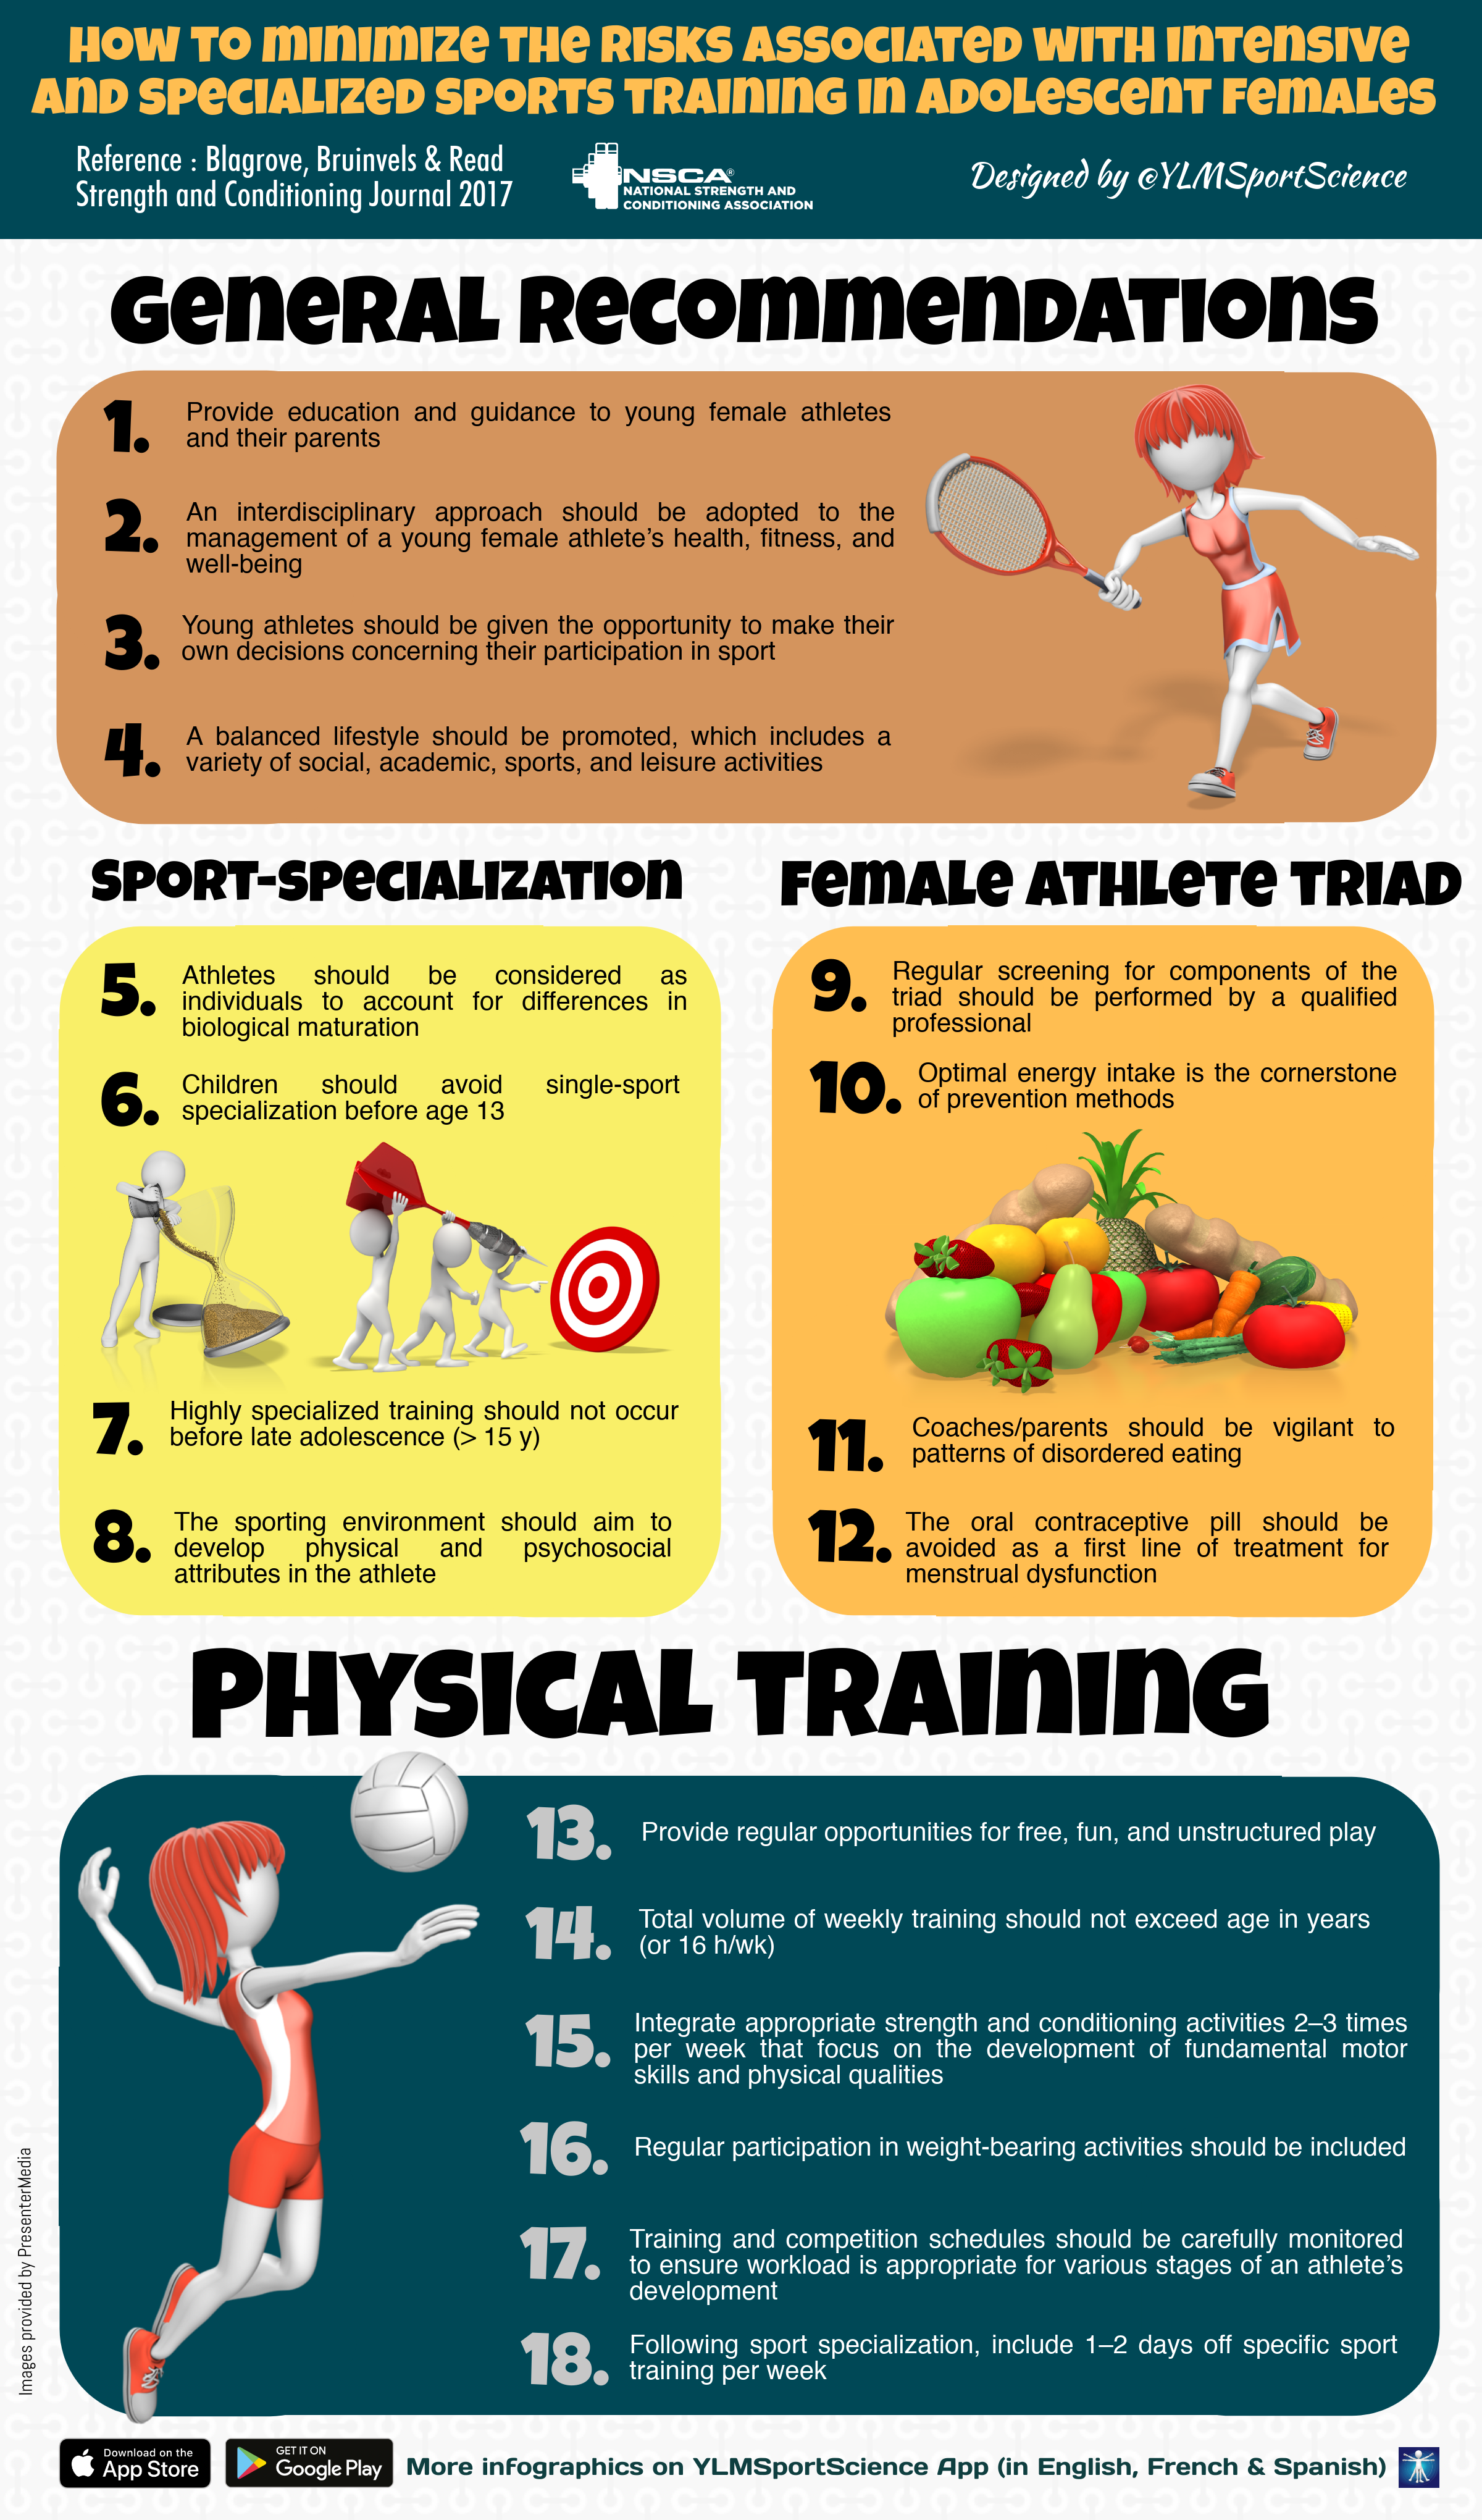 Infographic: How to Minimize the Risks Associated with Intensive and Specialized Sports Training in Adolescent Females